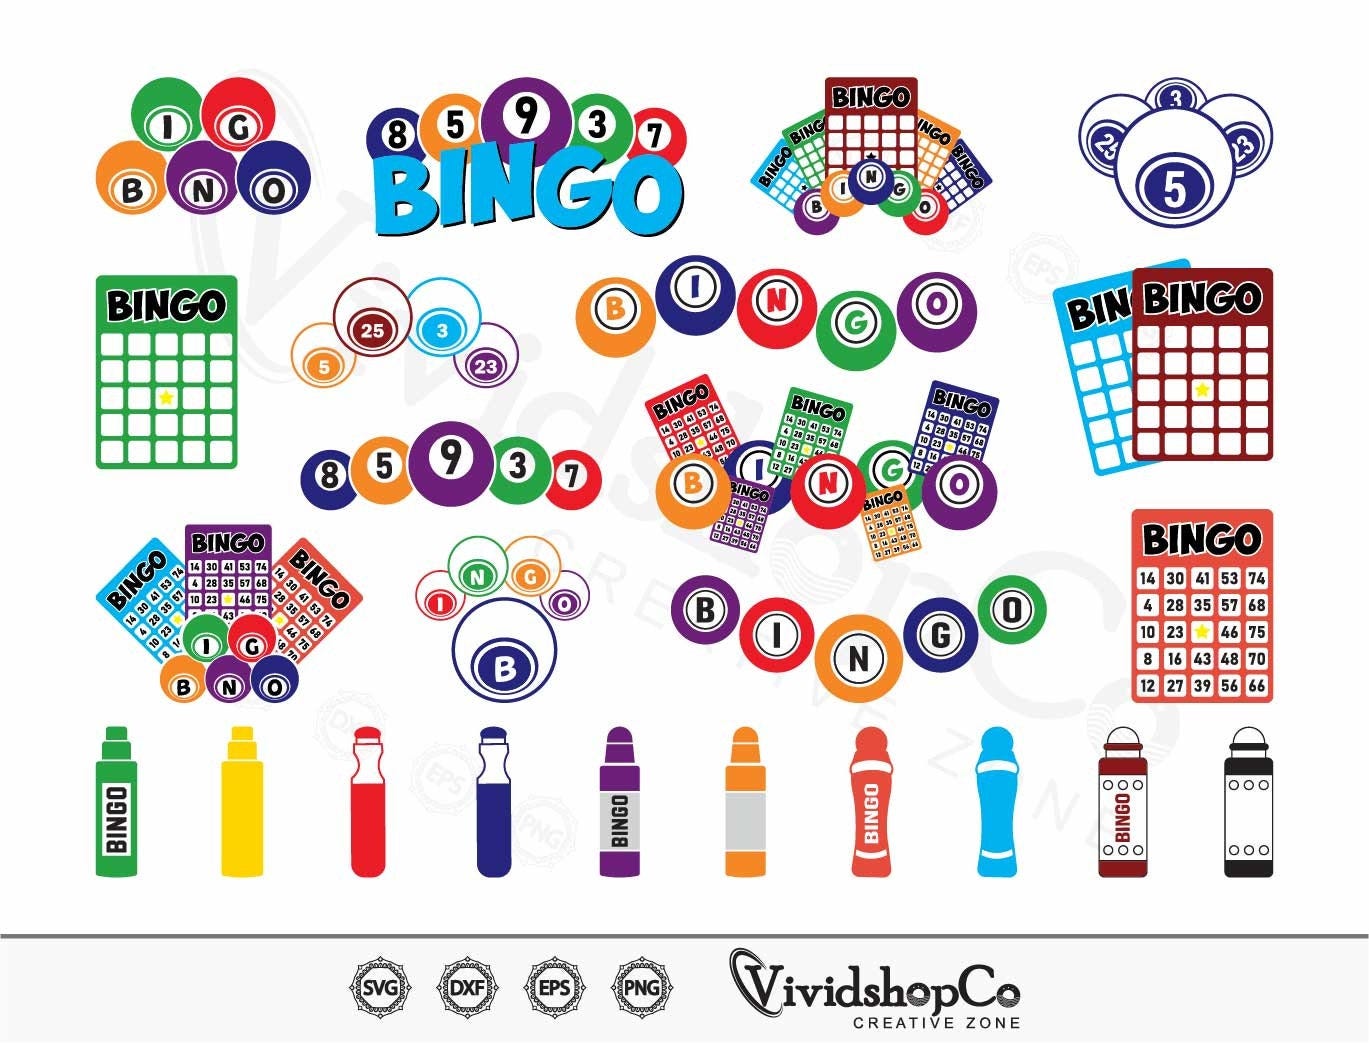 Bingo SVG, Bingo balls svg, bingo card svg, bingo Dauber svg, bingo coloring svg, Cut file for silhouette, svg, eps, dxf, png, clipart